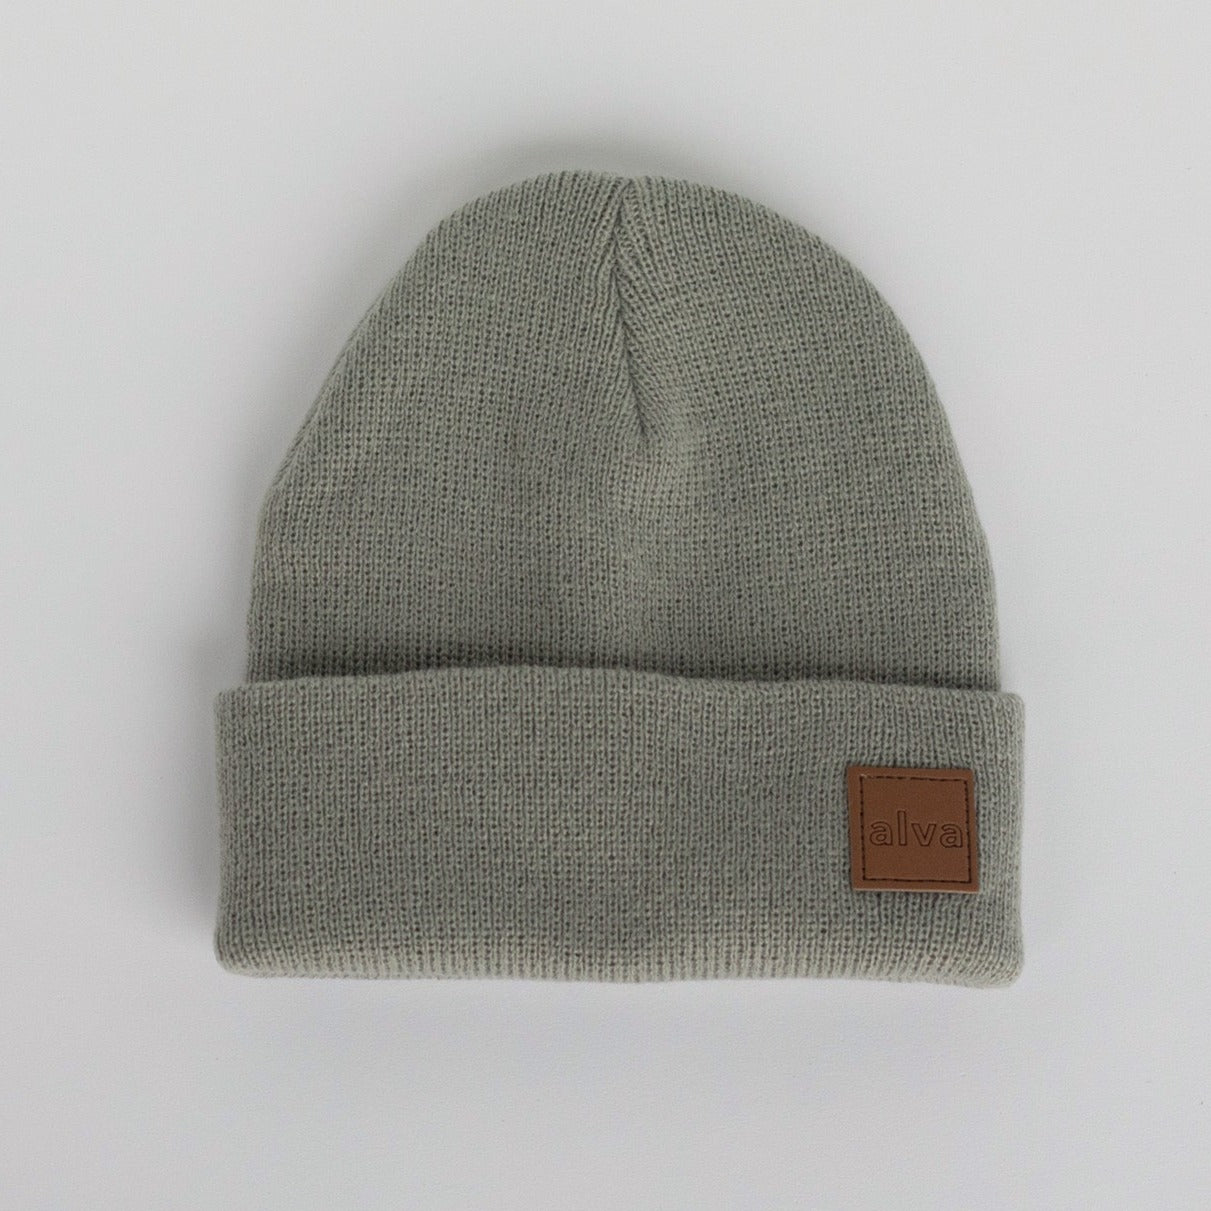 A sage grey colored ribbed baby beanie with a small square faux leather patch that says &quot;alva&quot; on the bottom right corner. The hat is sitting on a white background